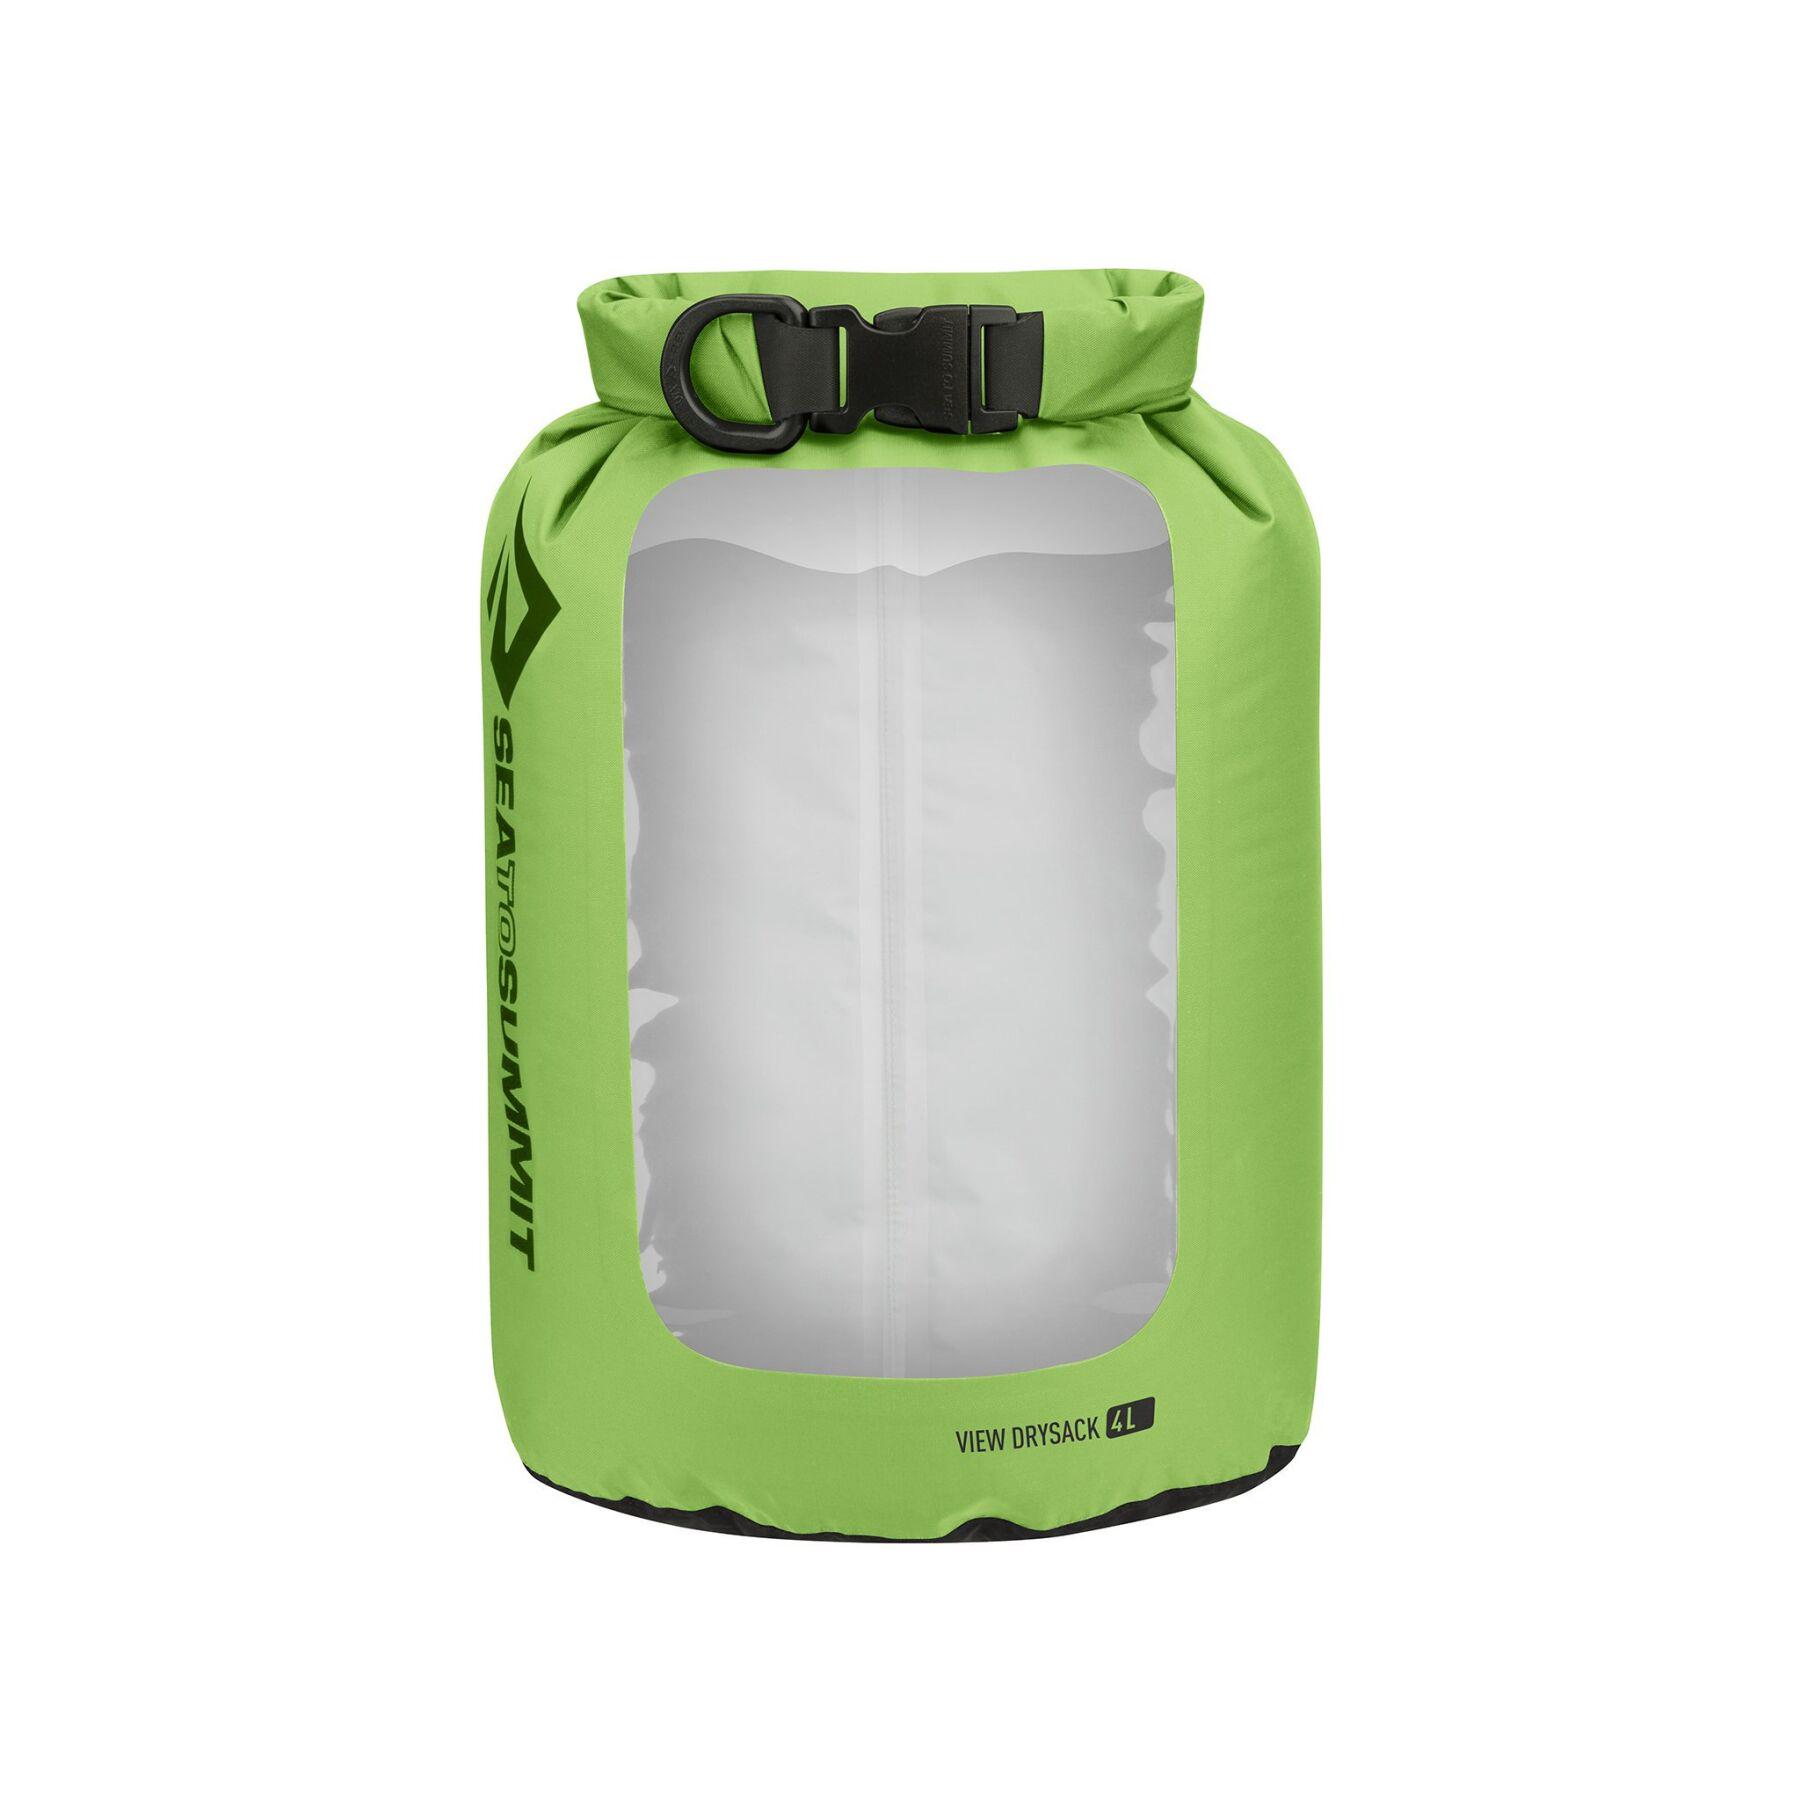 Гермомешок Sea To Summit View Dry Sack 4 л (1033-STS AVDS4GN)